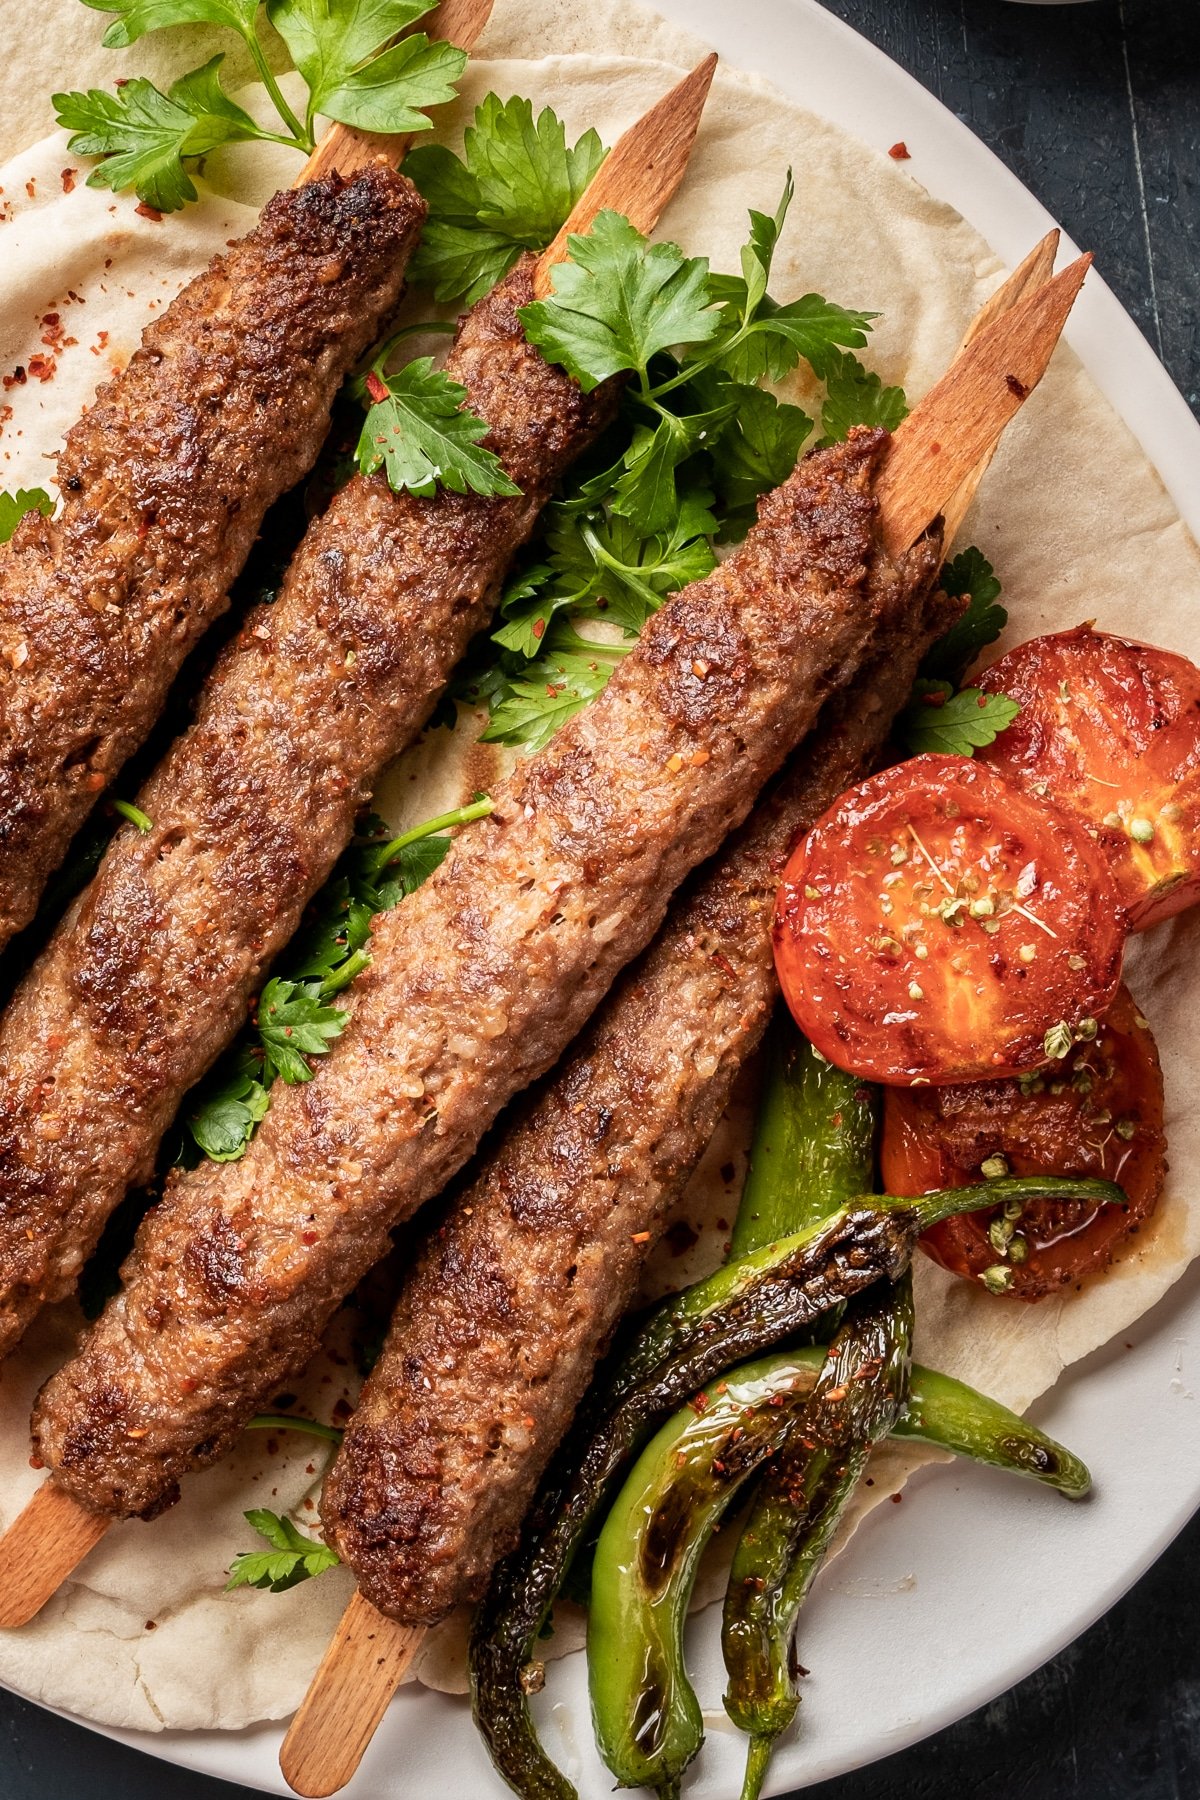 Homemade Adana lamb kebabs on lavash bread with parsley, tomatoes and green peppers.